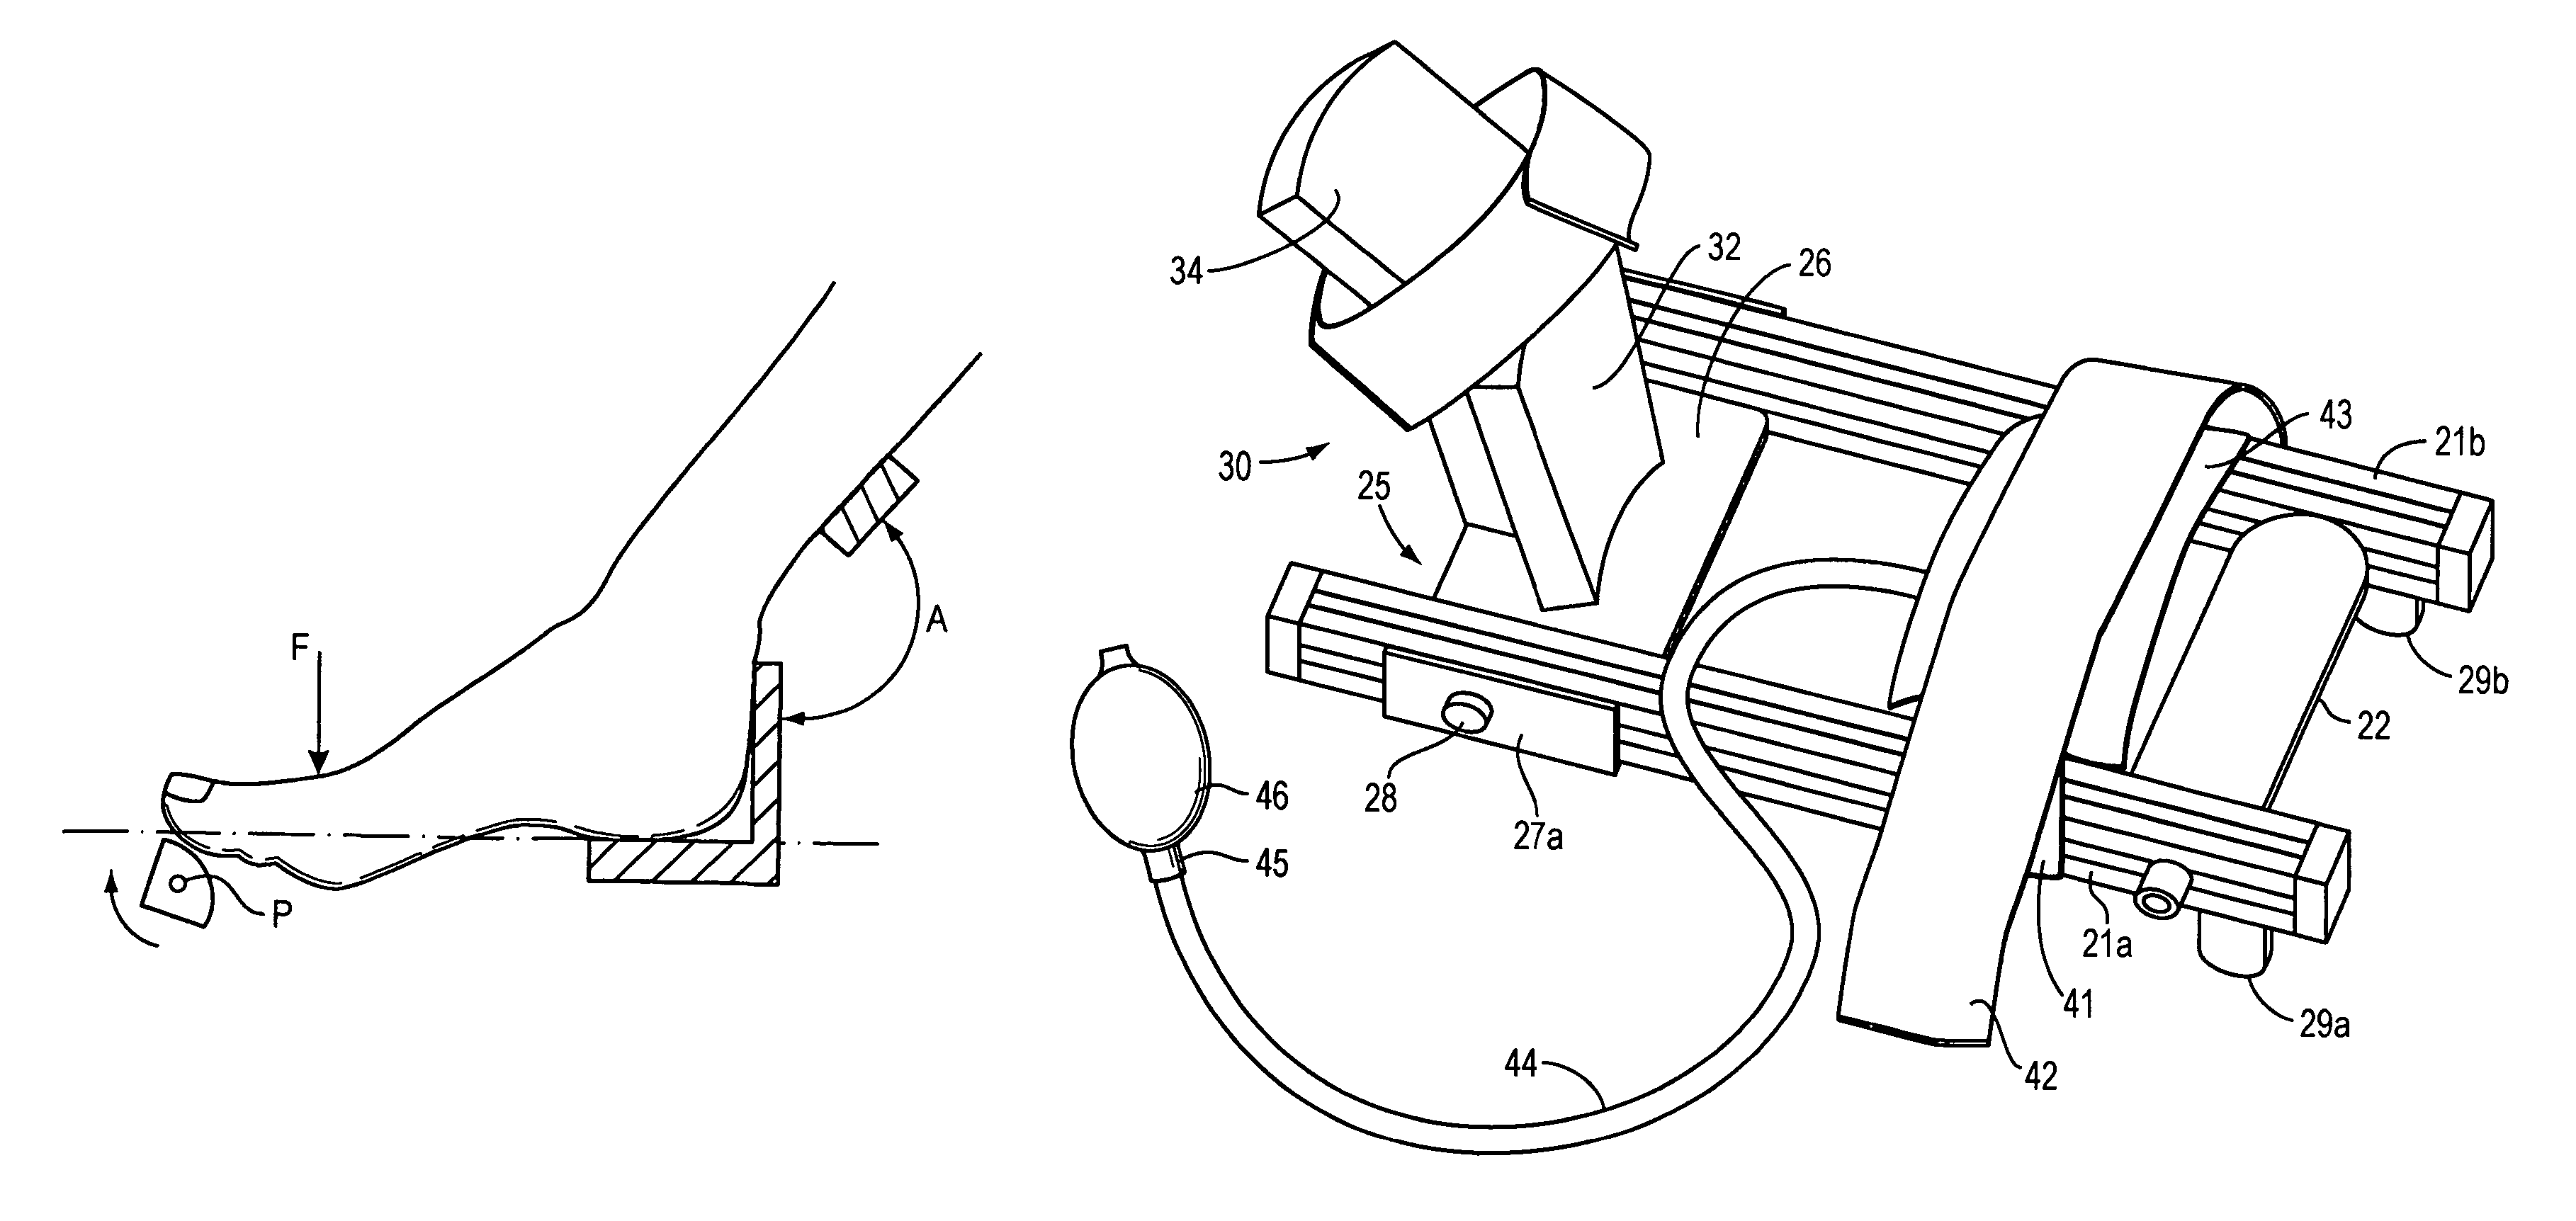 Method and apparatus for manipulating a toe joint